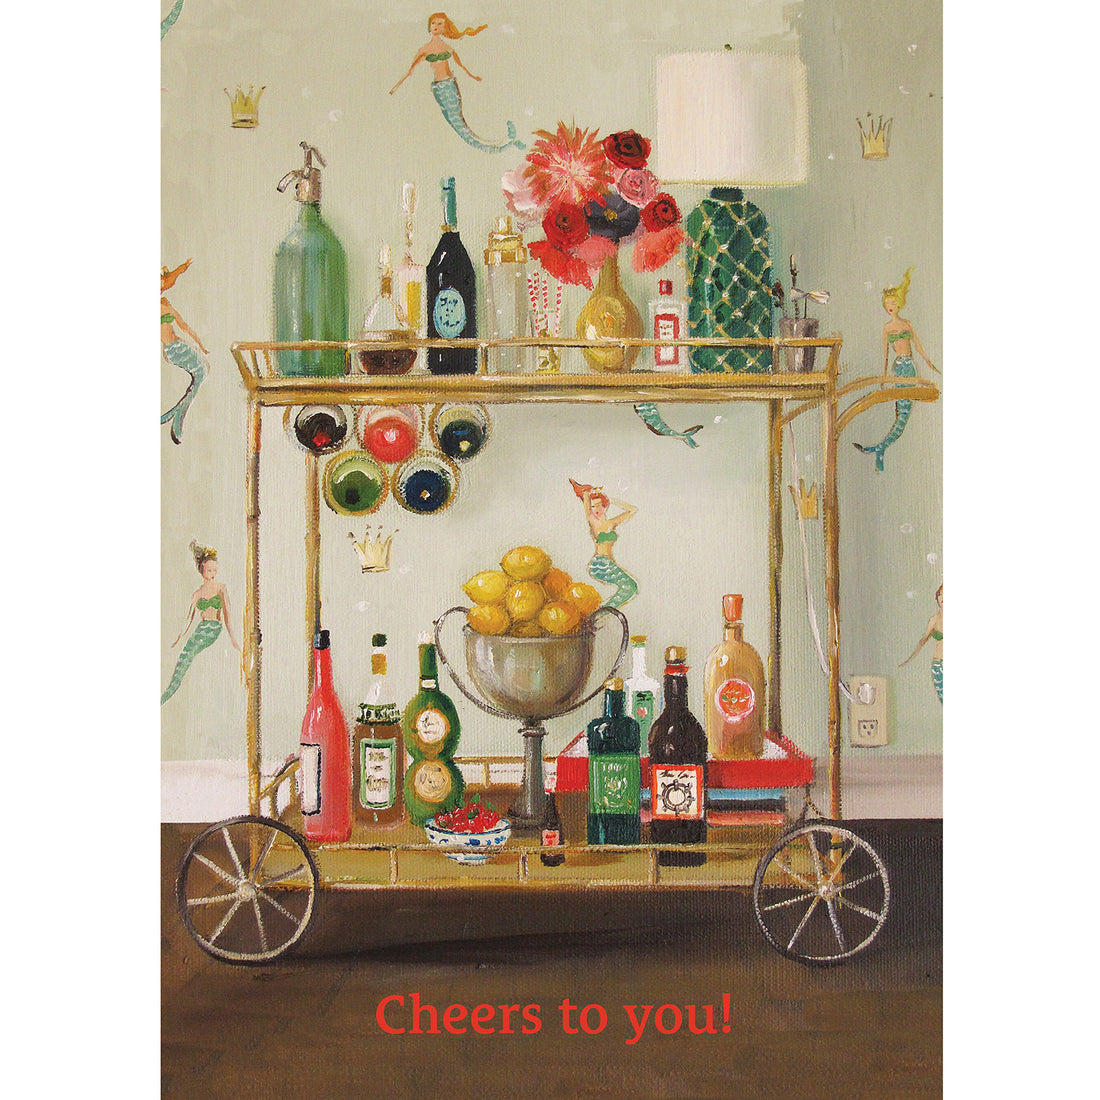 A painterly illustration of a mobile bar cart with an assortment of beverages, standing out against a mermaid-themed wallpaper, with &quot;Cheers to you!&quot; printed in bright orange along the bottom of the card.